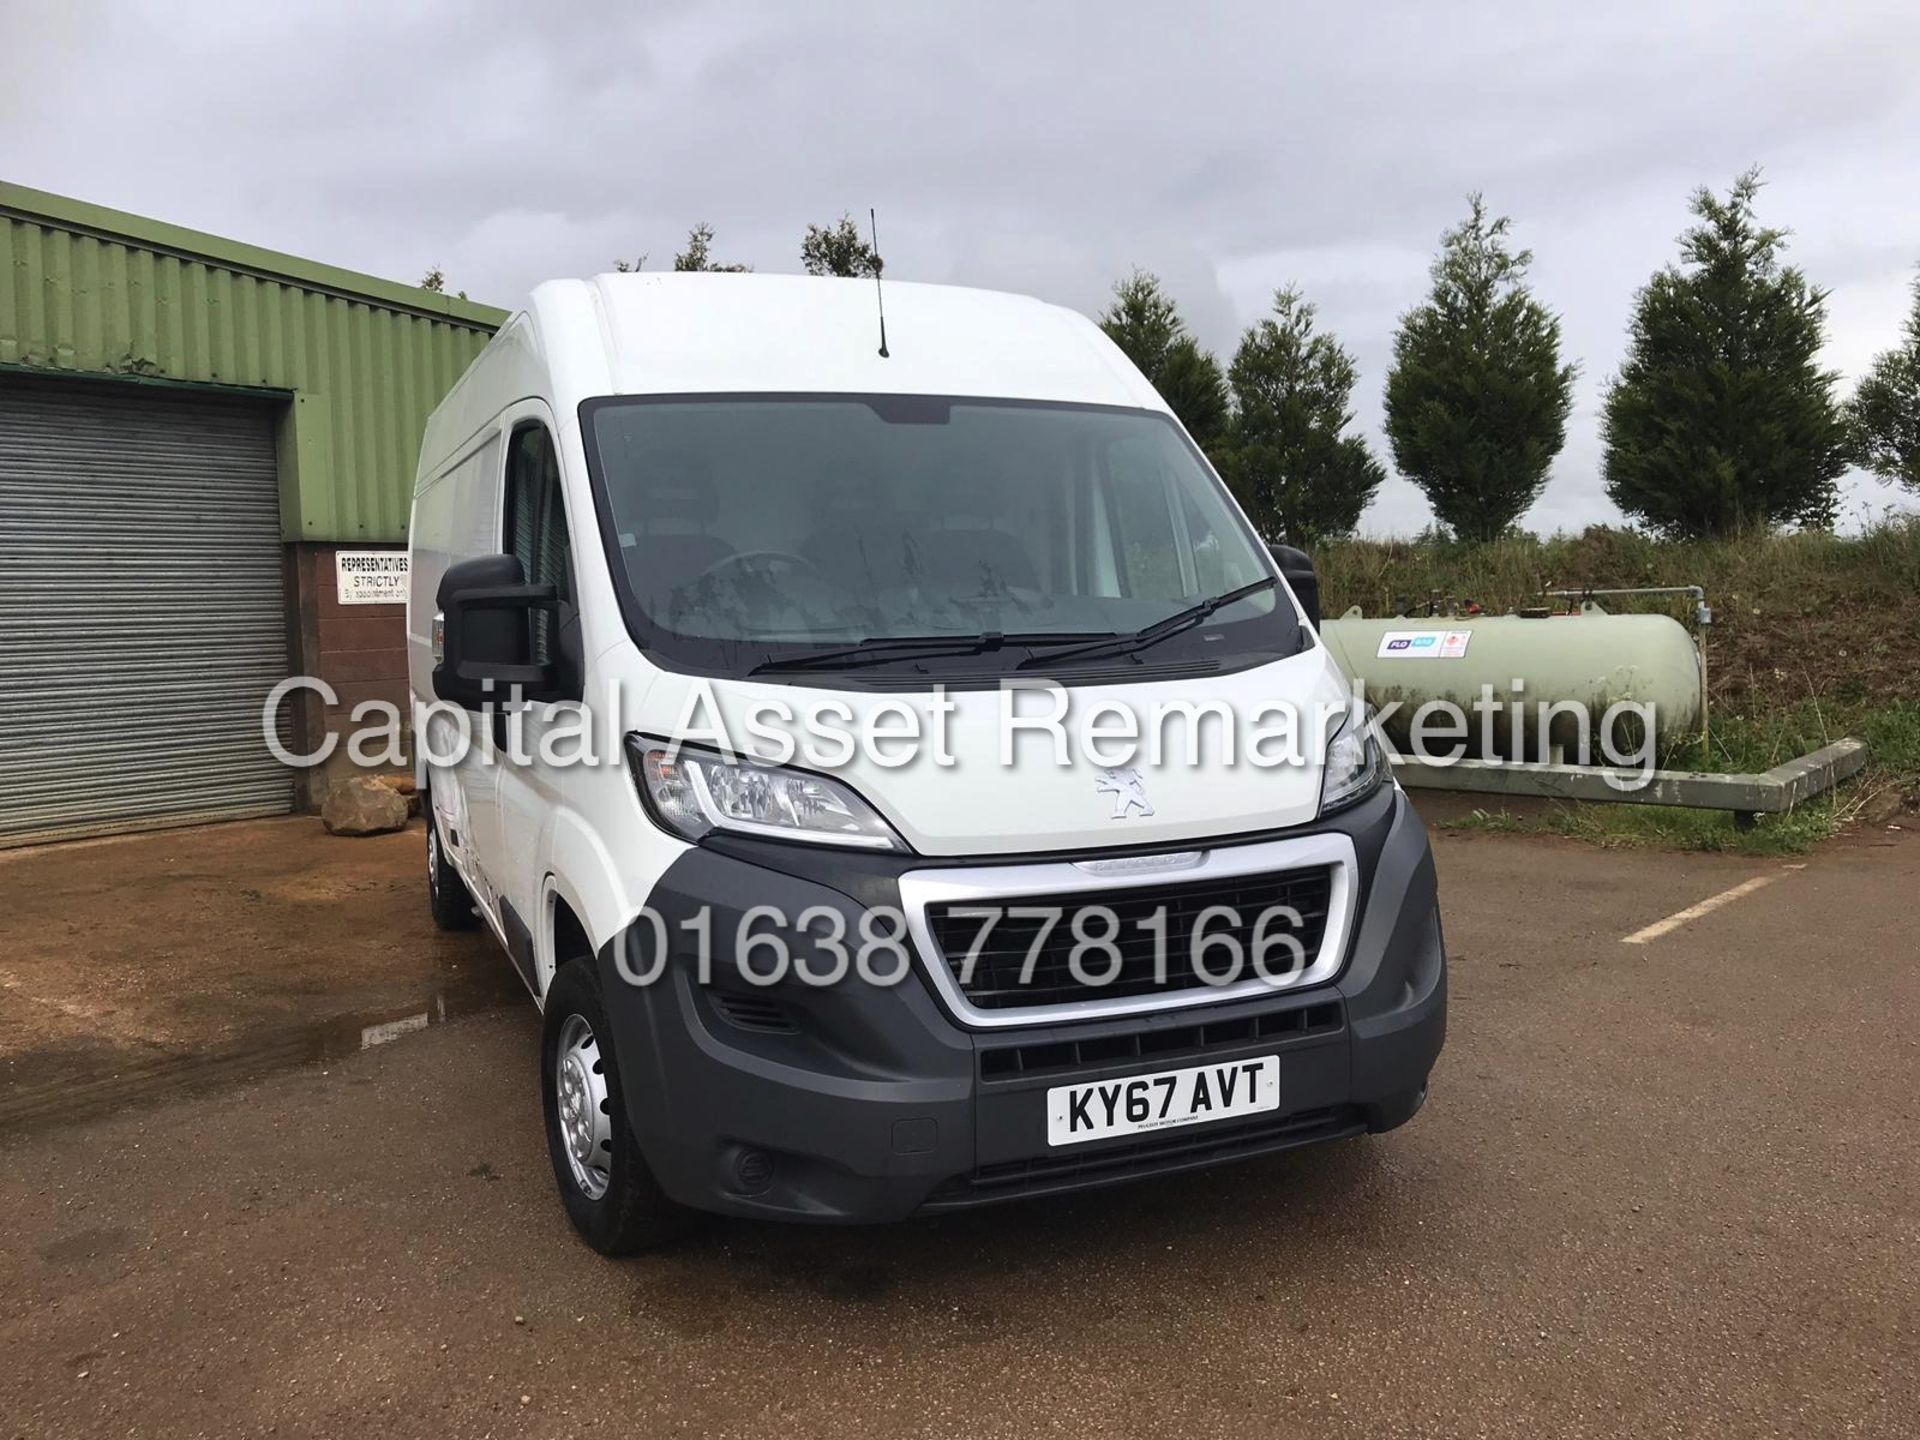 (ON SALE) PEUGEOT BOXER 2.0HDI "130BHP -6 SPEED" LWB (2018 MODEL)*ONLY 33K* EURO 6 -AIR CON -SAT NAV - Image 3 of 13